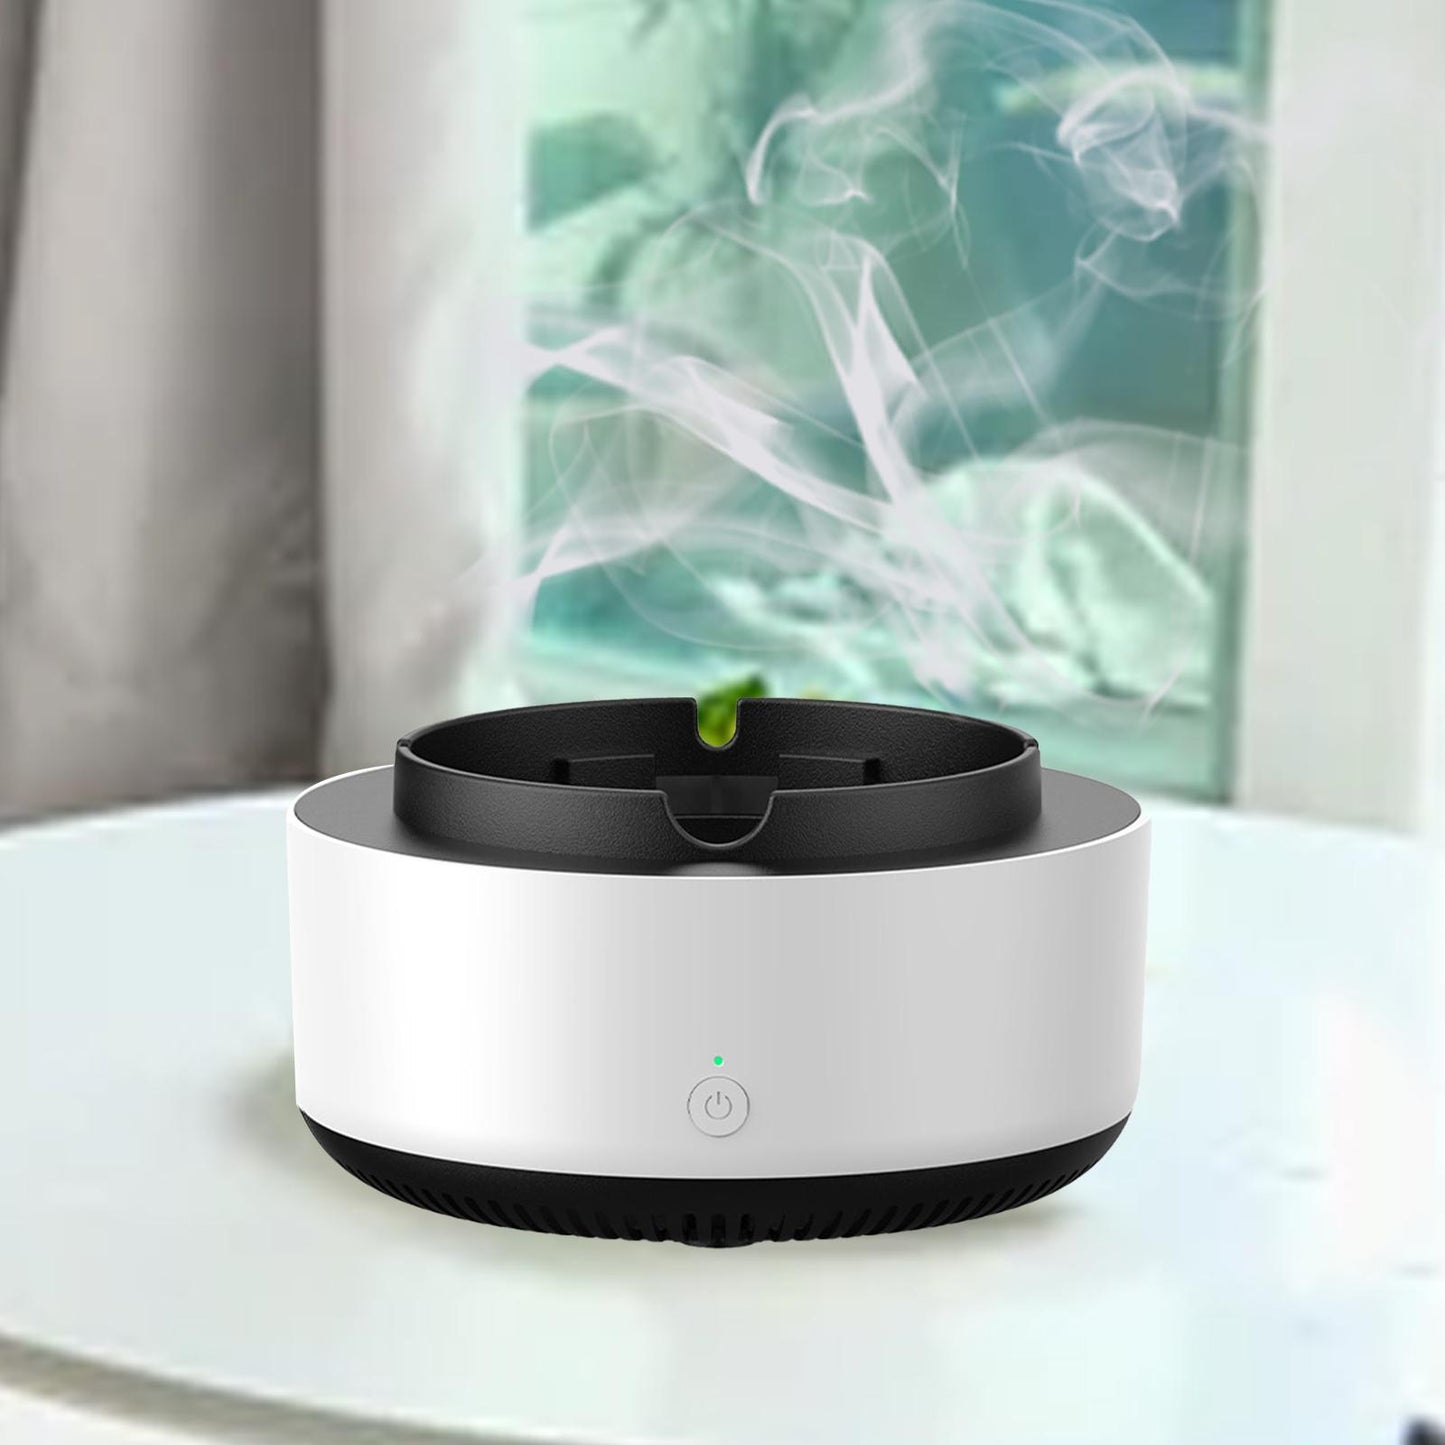 Ashtray with Air Purifier gadgets